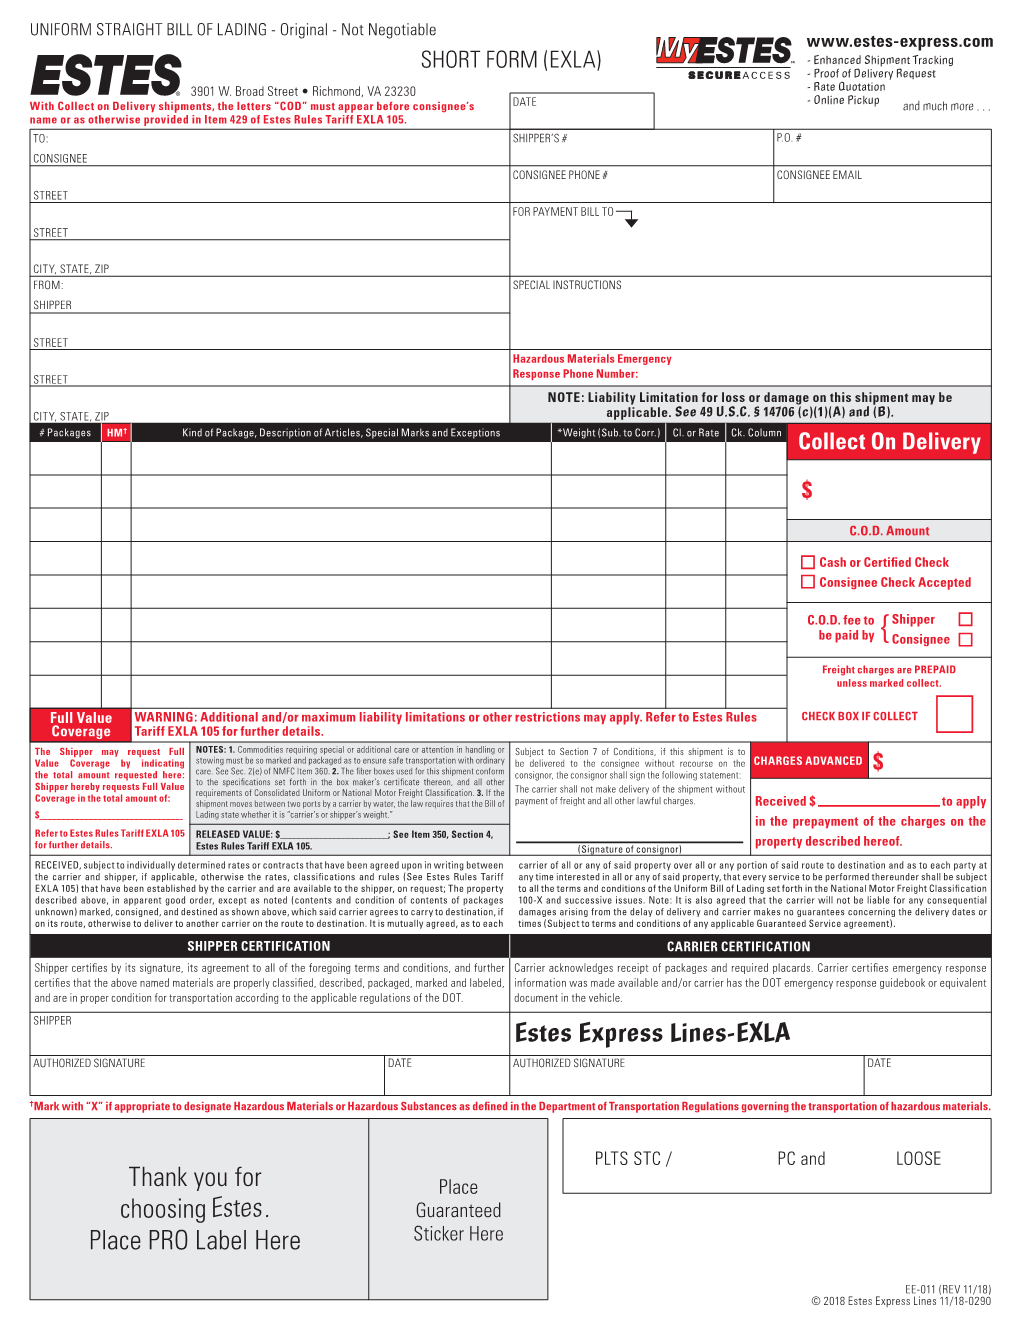 BILL of LADING - Original - Not Negotiable SHORT FORM (EXLA) - Enhanced Shipment Tracking - Proof of Delivery Request 3901 W